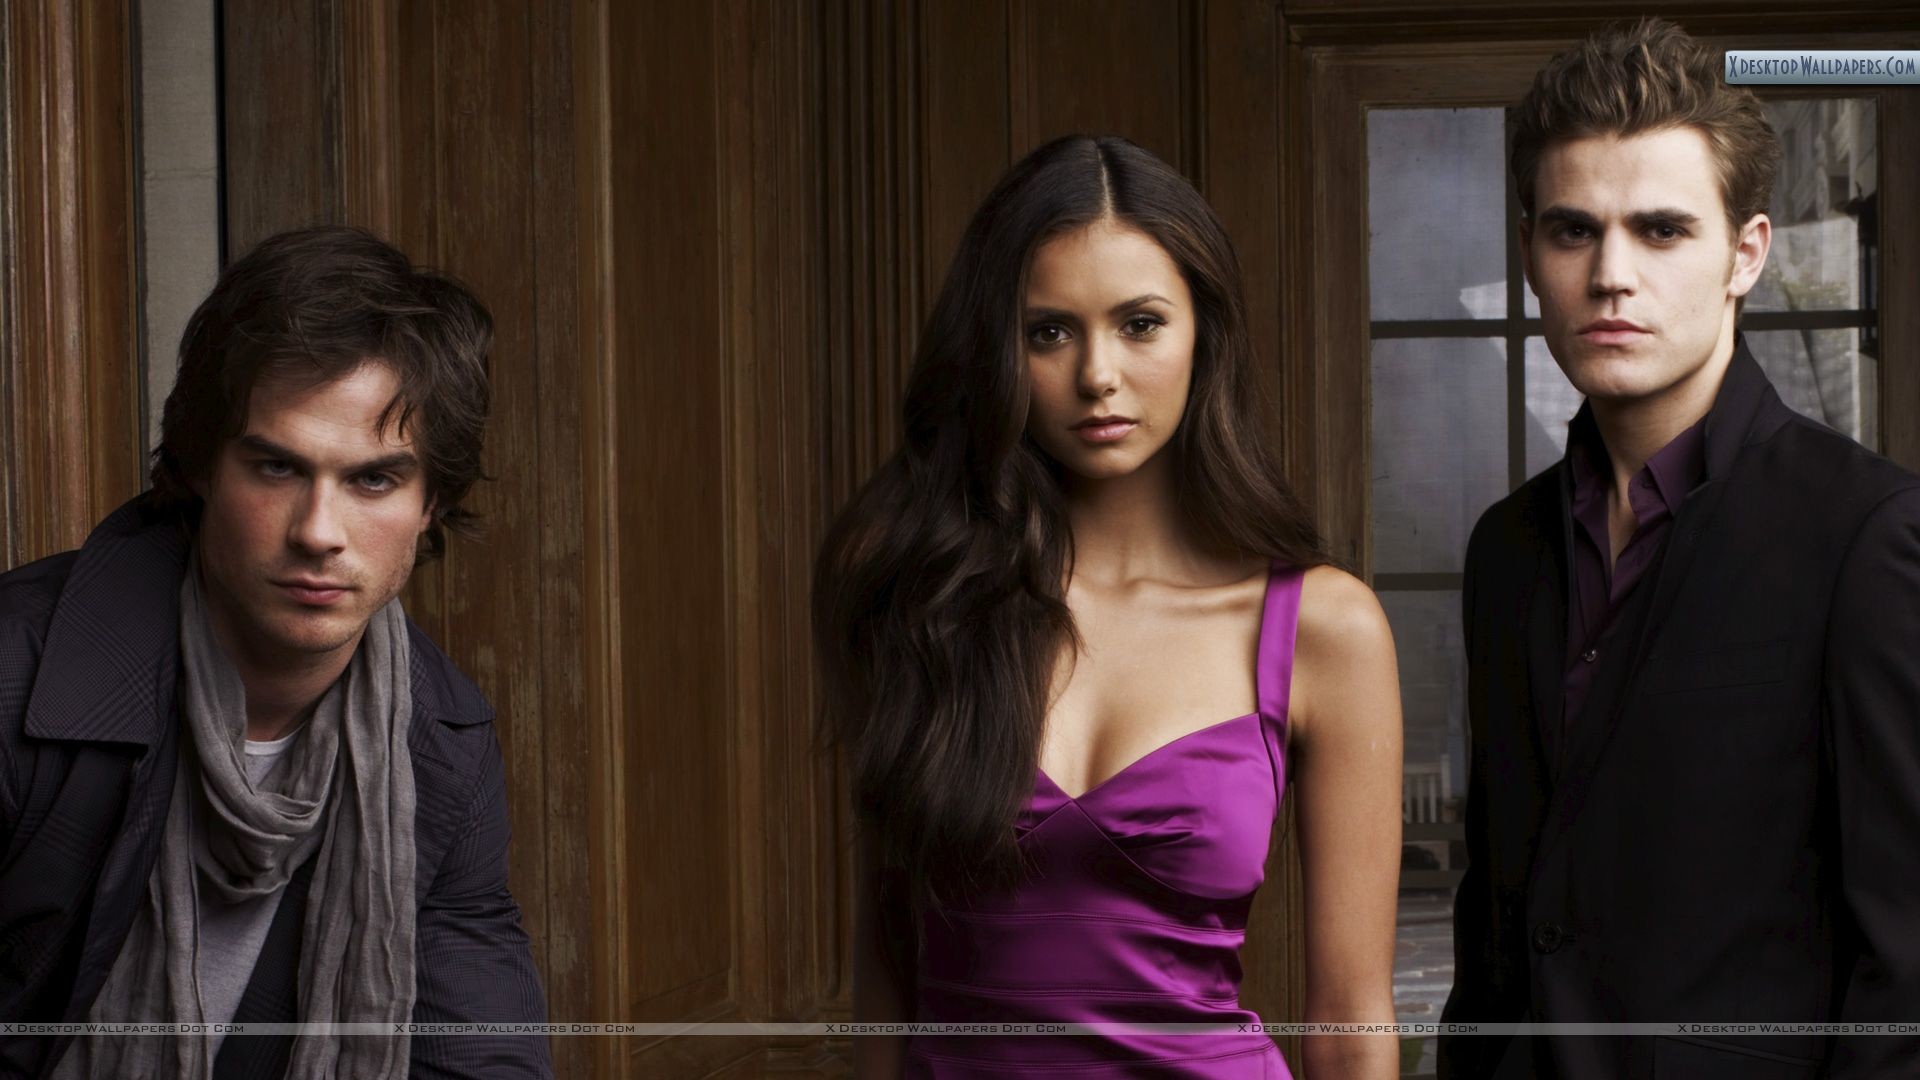 1920x1080 You are viewing wallpaper titled "Damon Elena Stefan Standing in TV Series Vampire  Diaries" ...